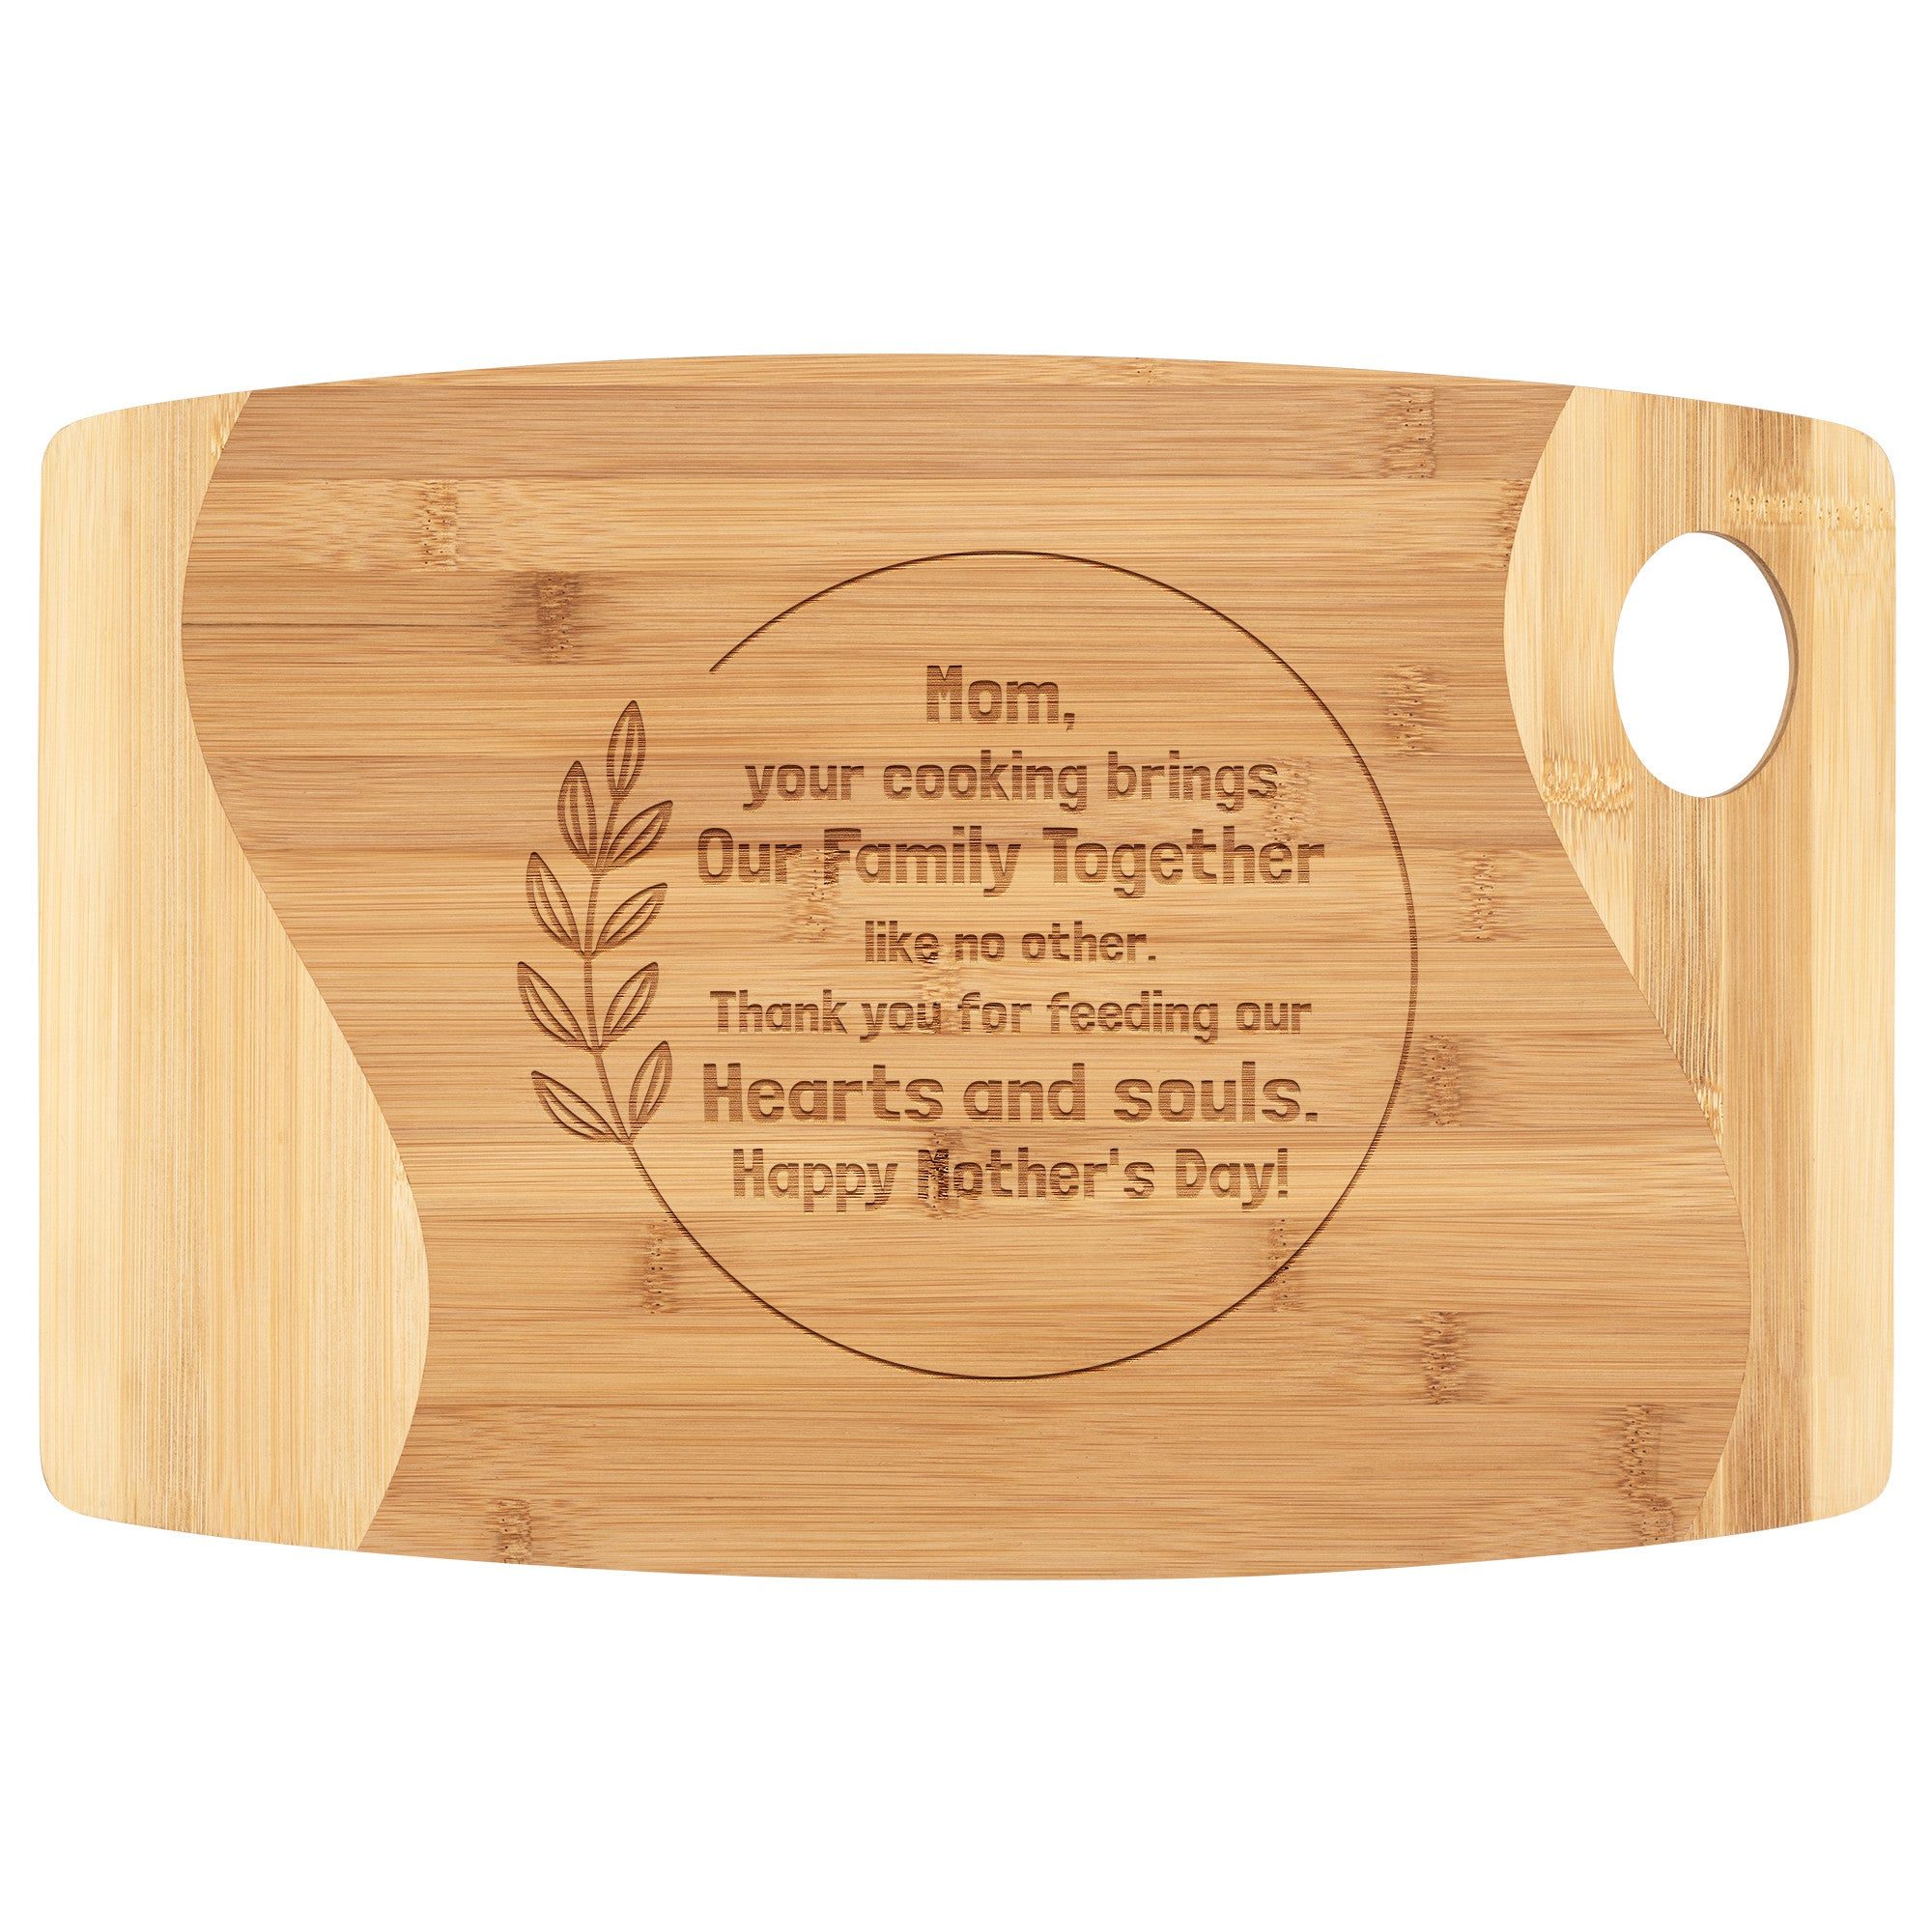 Bring Family Together - Cutting Board for Mother's Day